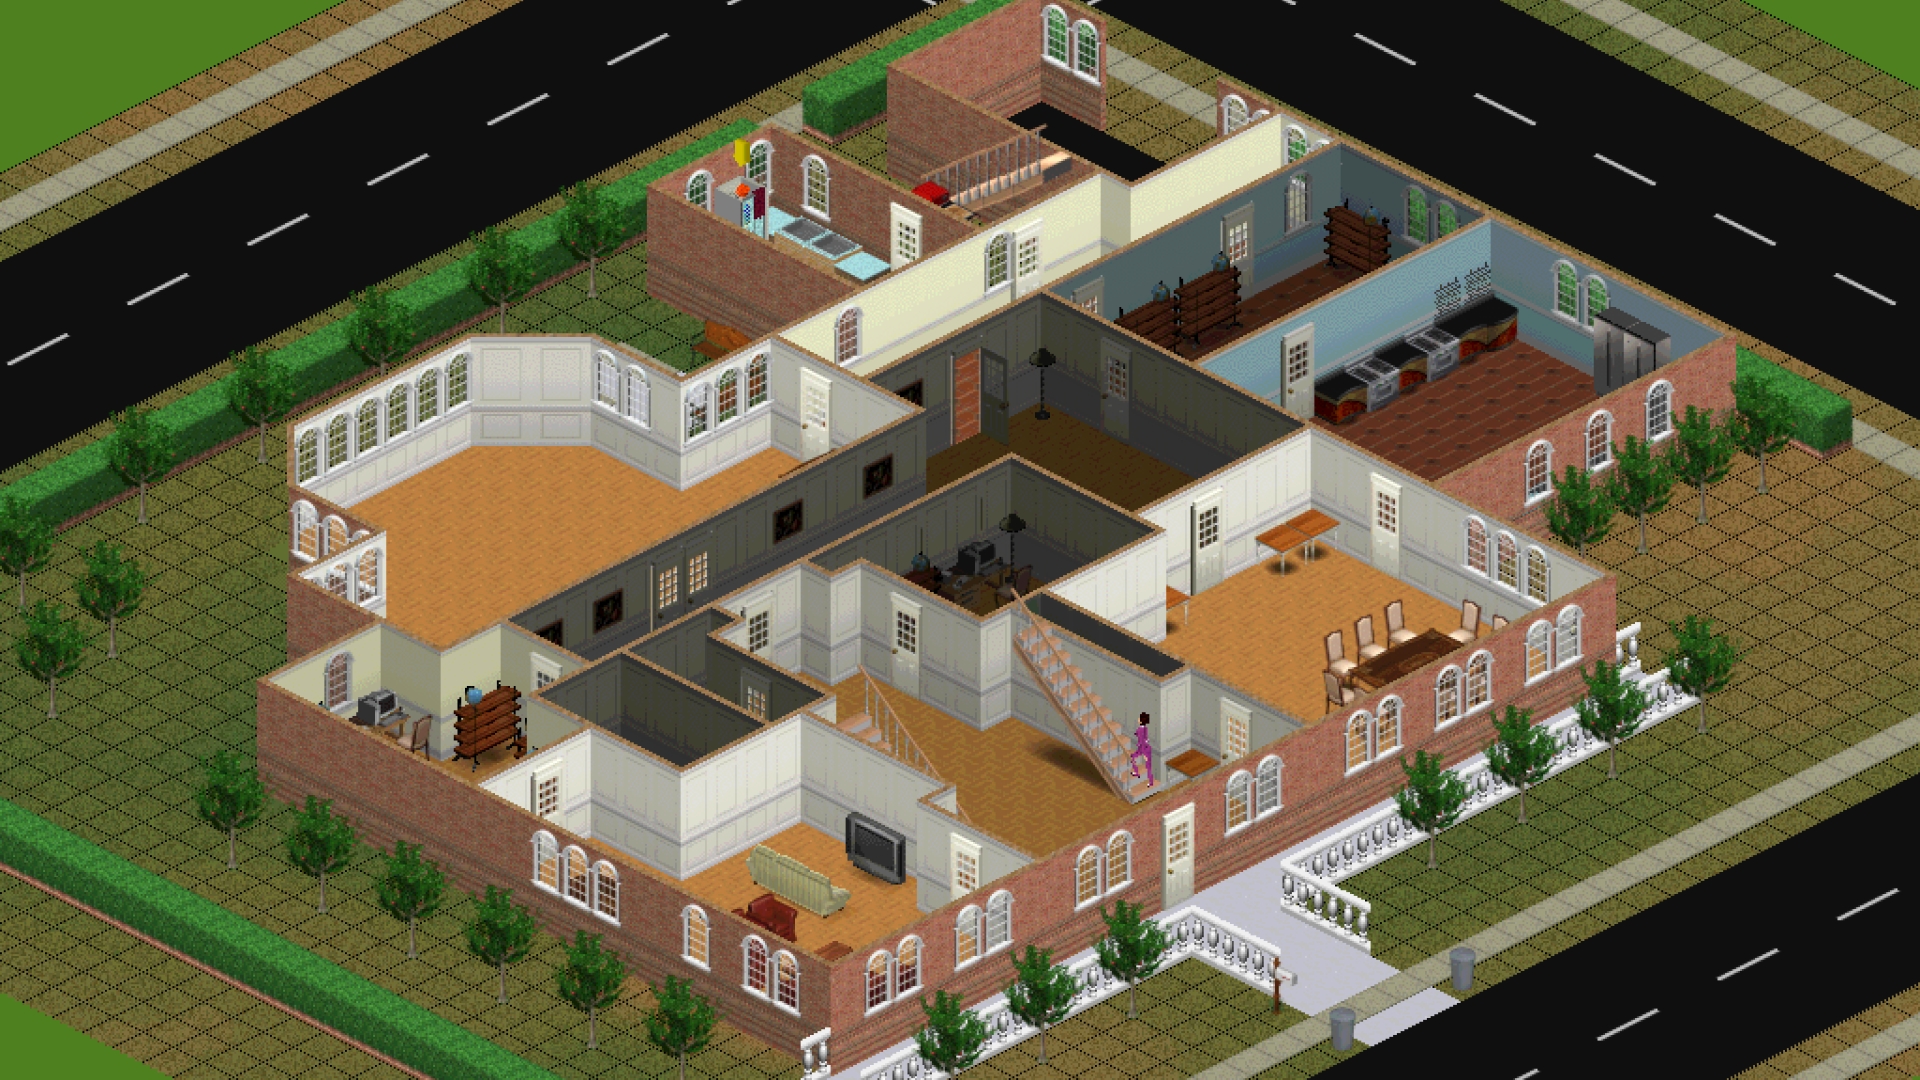 Designing a home in The Sims (2000)